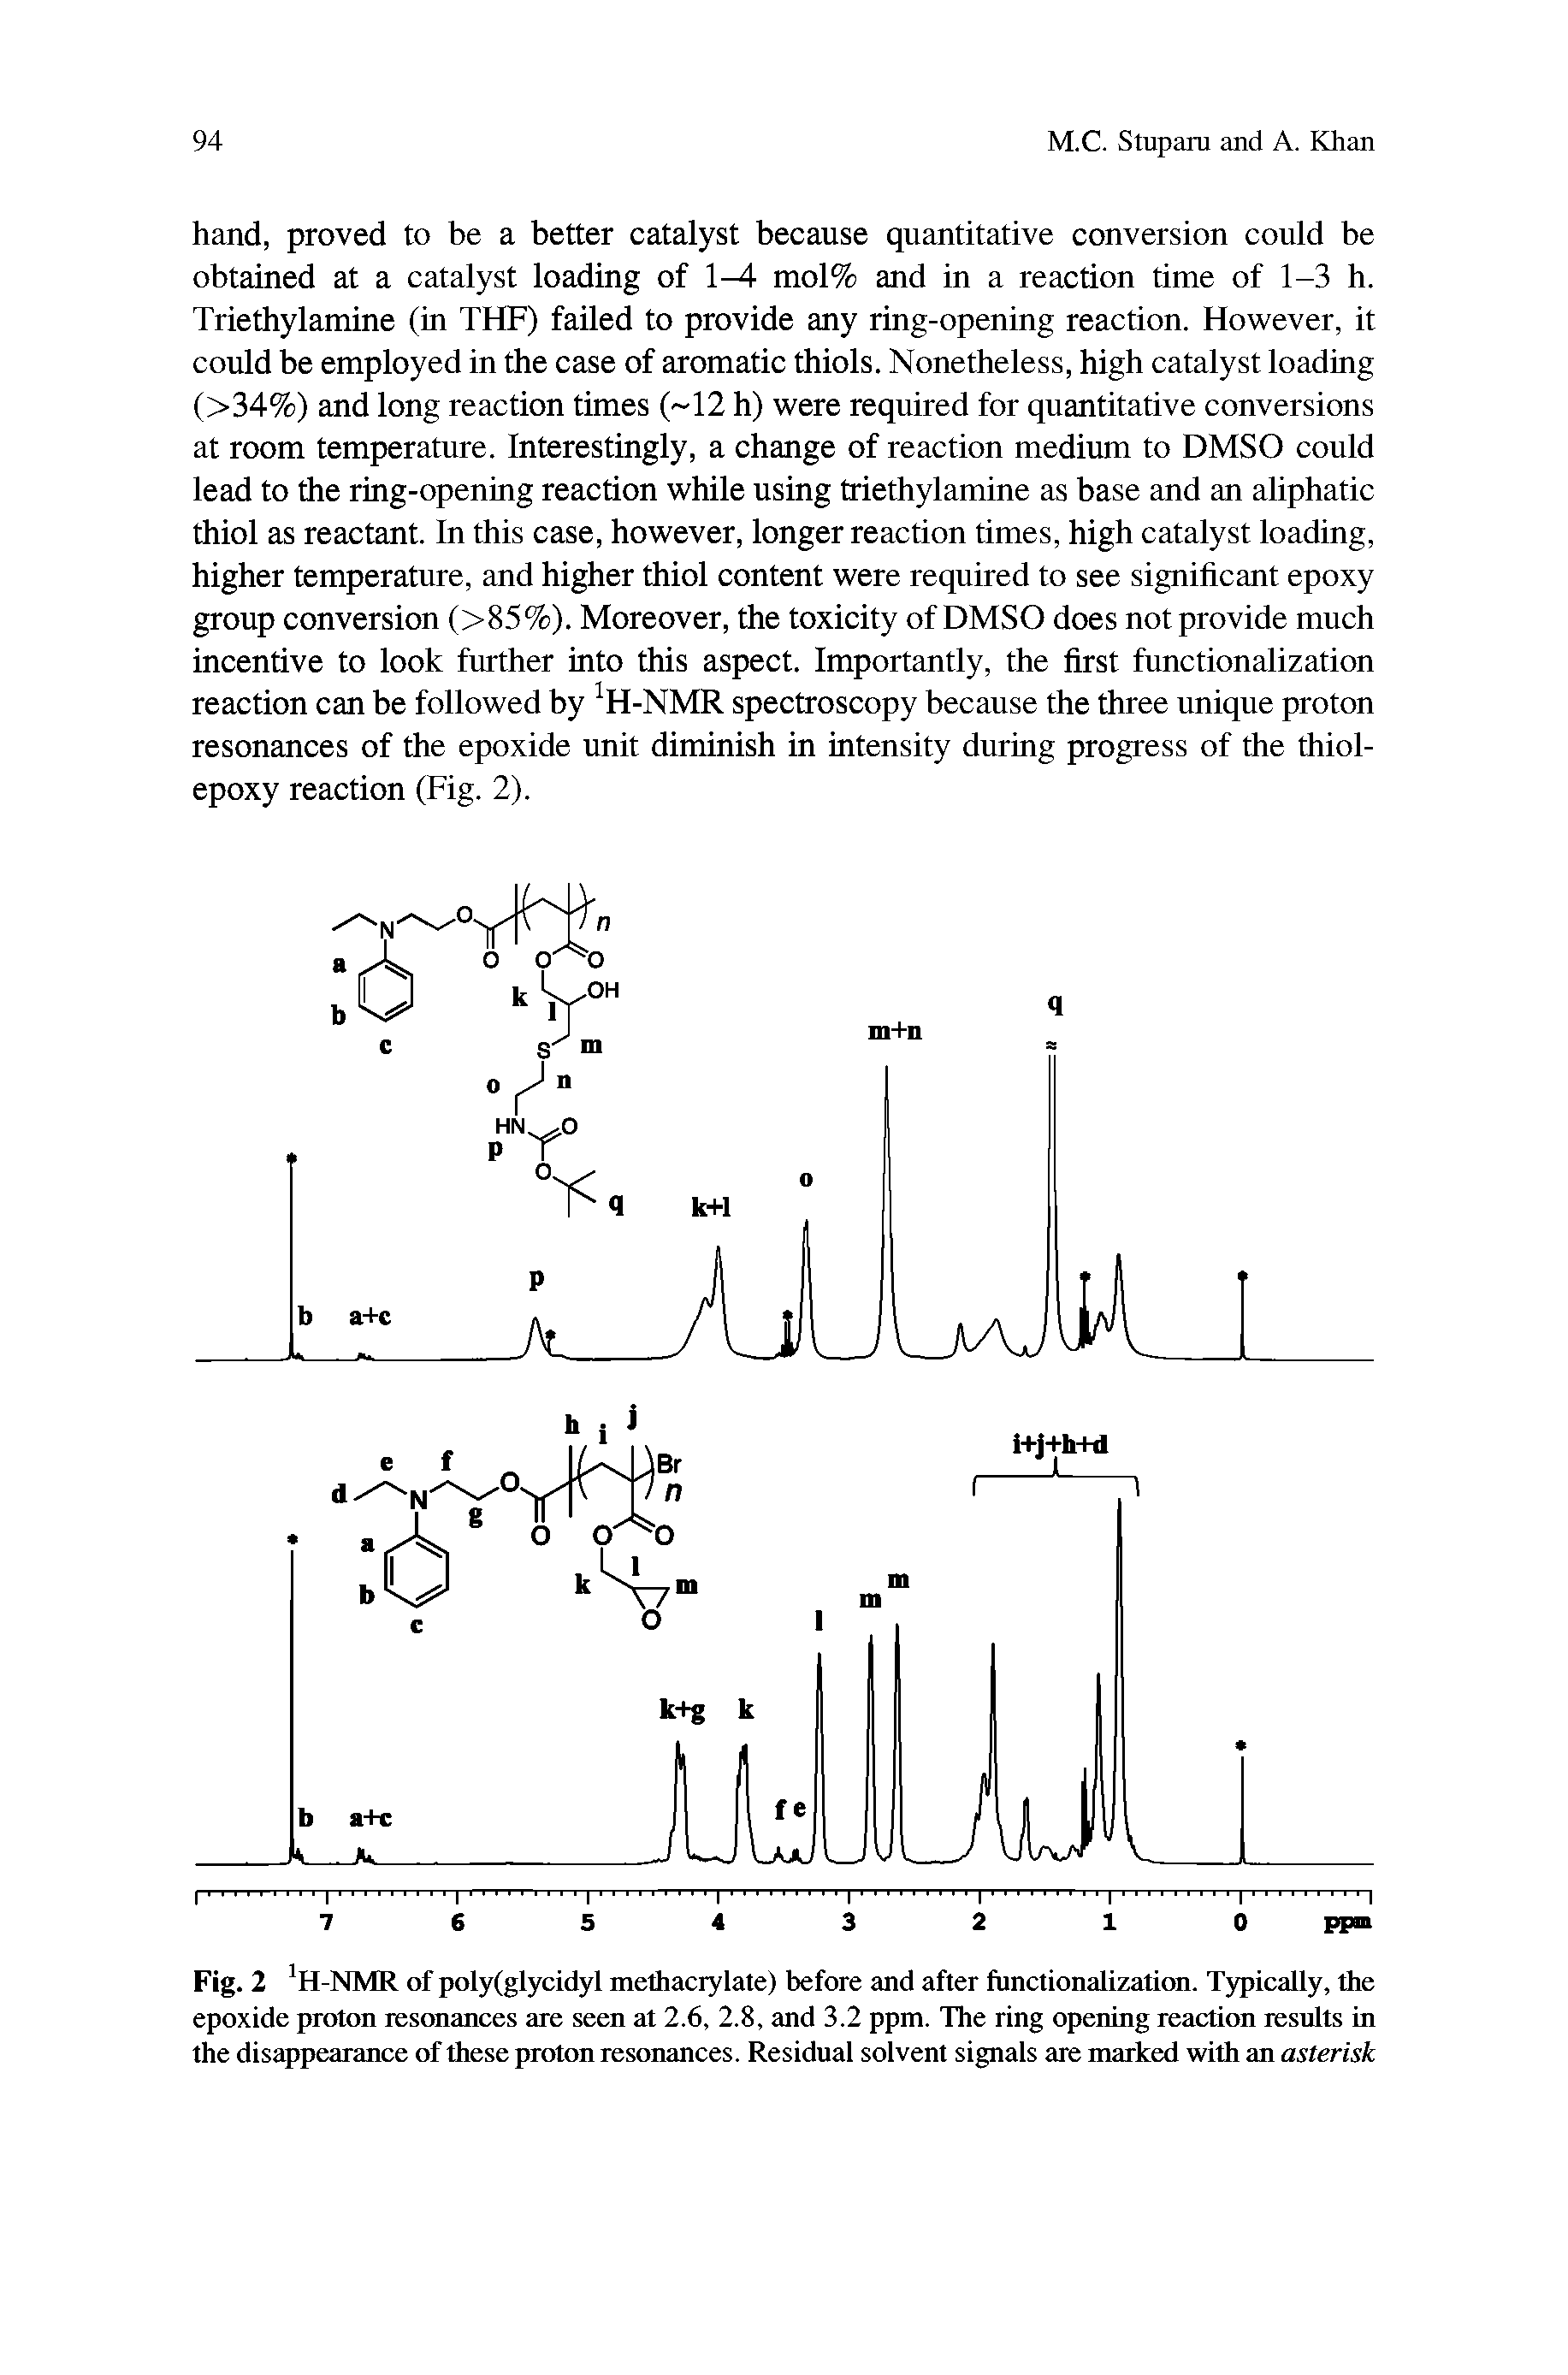 Fig. 2 H-NMR of poly(gfycidyf methacrylate) before and after fiinctionalizatirai. Typically, the epoxide proton resonances are seen at 2.6, 2.8, and 3.2 ppm. The ring opening reaction results in the disappearance of these proton resonances. Residual solvent signals are marked with an asterisk...